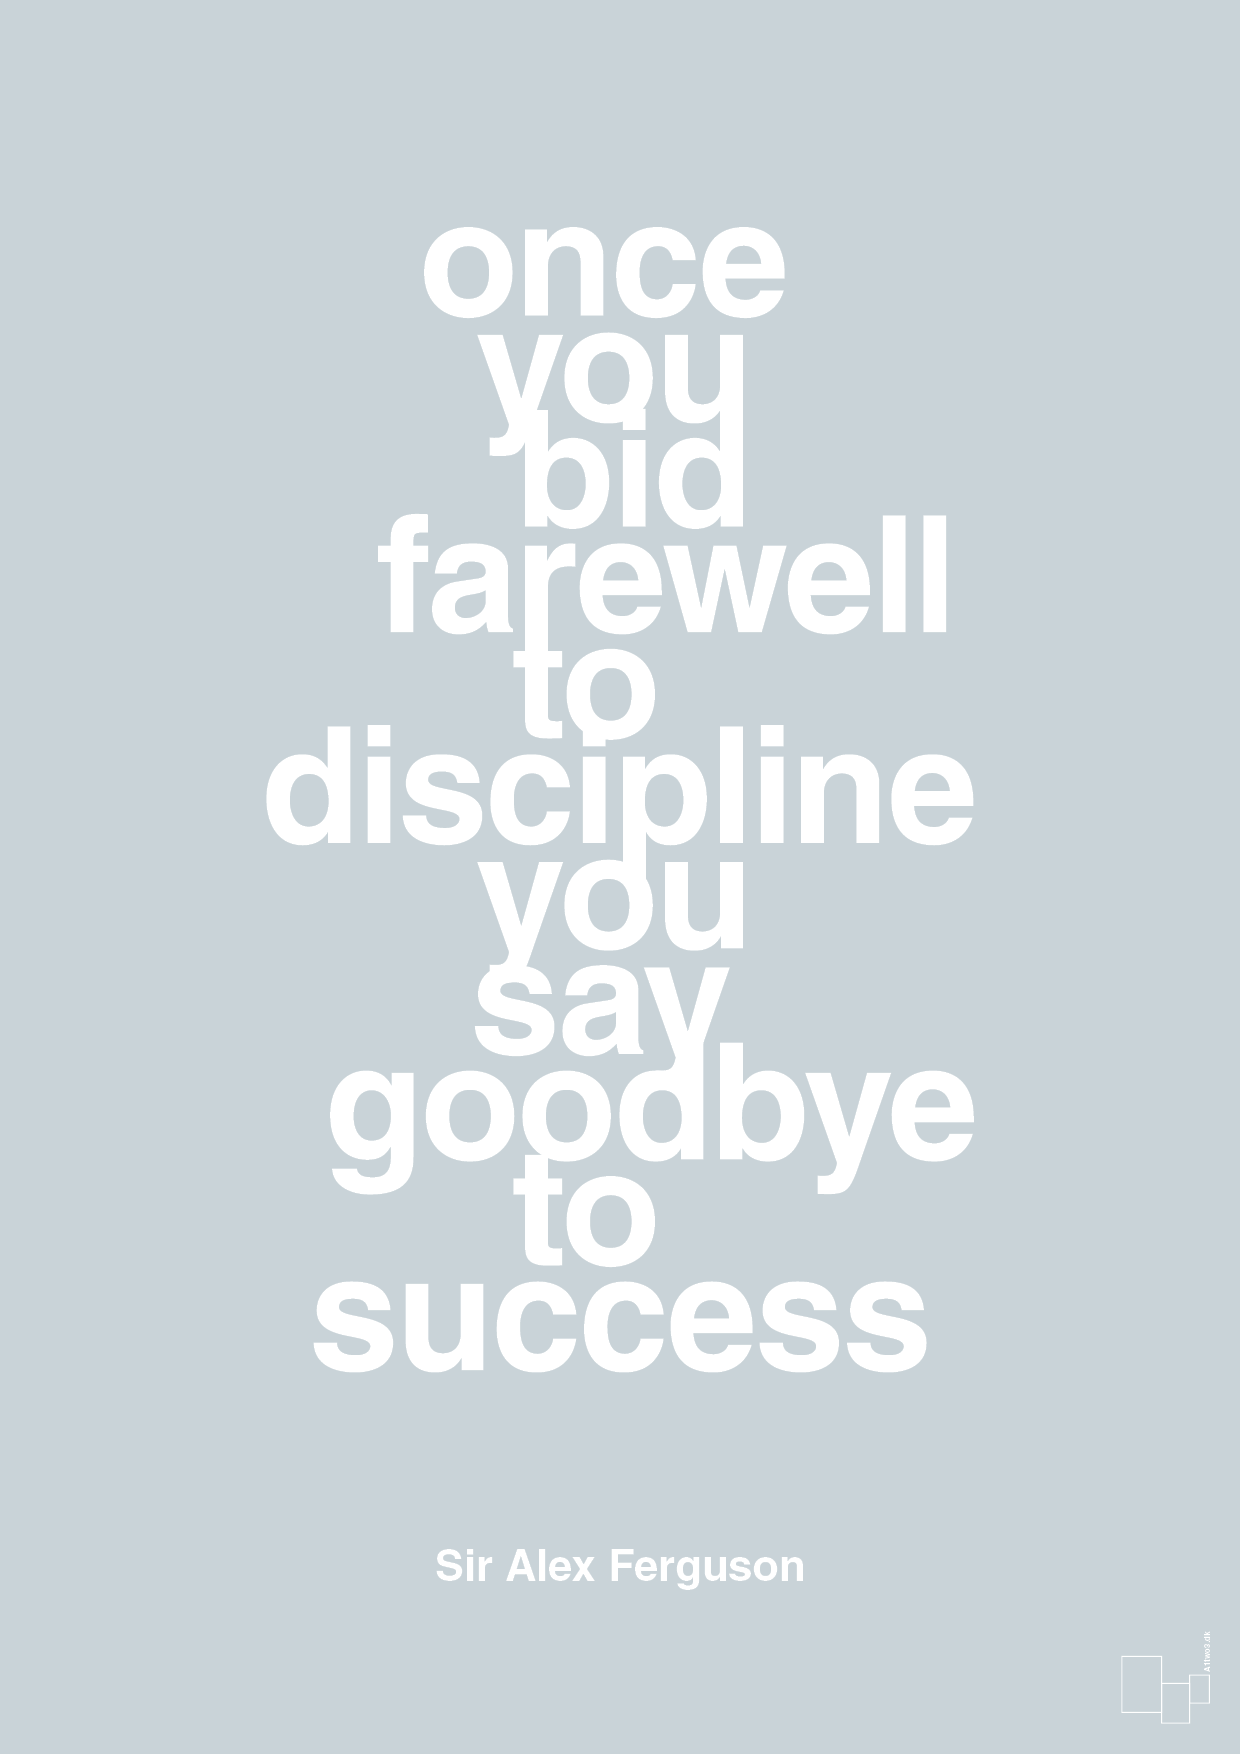 once you bid farewell to discipline you say goodbye to success - Plakat med Citater i Light Drizzle